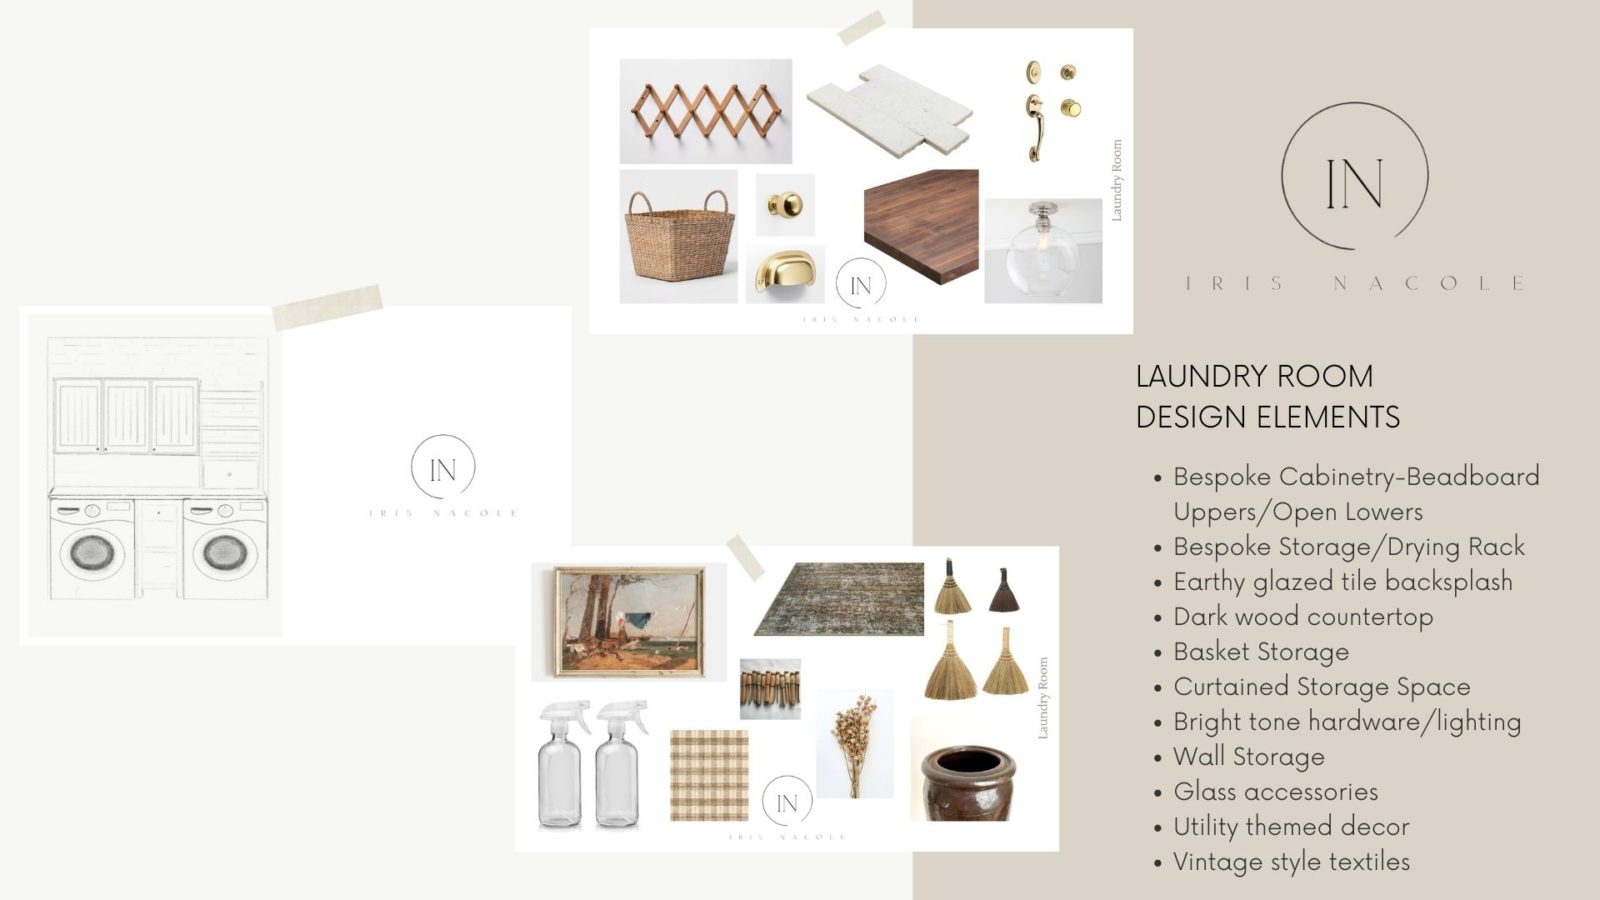 Page 5 of Laundry Room Design Presentation by Iris Nacole